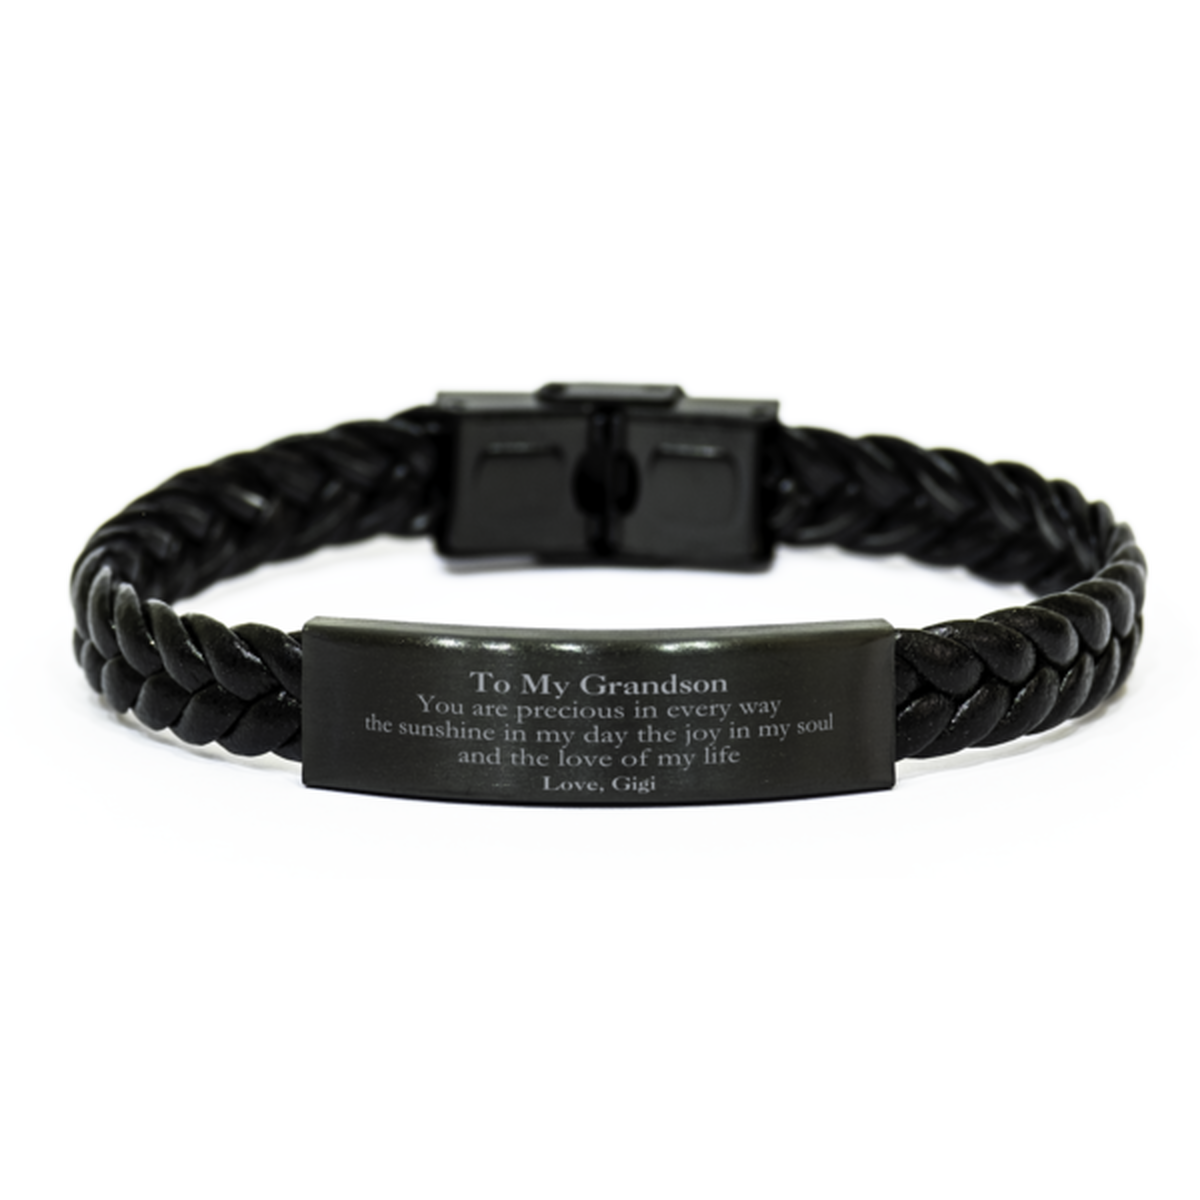 Graduation Gifts for Grandson Braided Leather Bracelet Present from Gigi, Christmas Grandson Birthday Gifts Grandson You are precious in every way the sunshine in my day. Love, Gigi